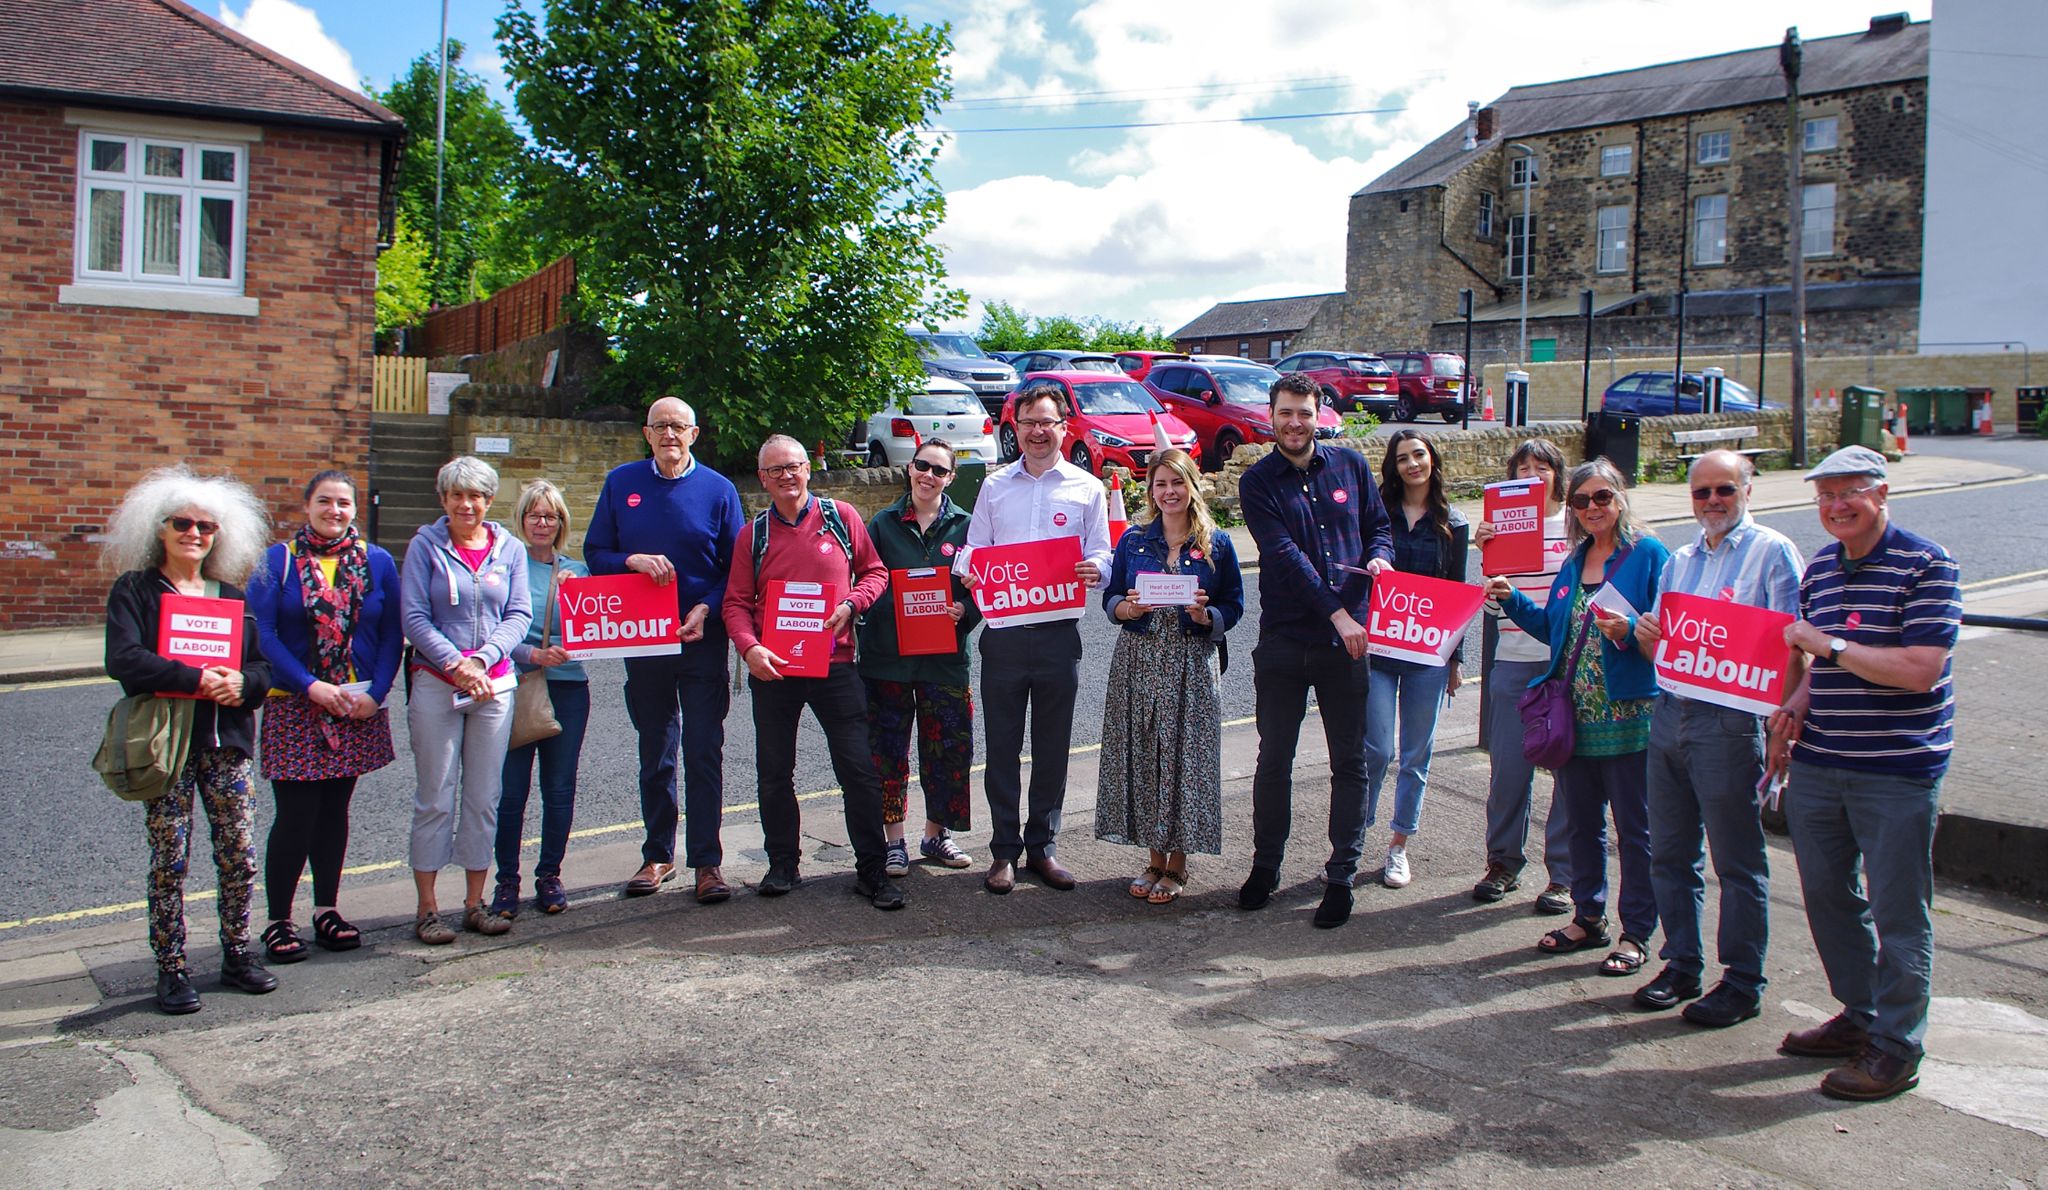 Out with Opperman! Campaigning for a Labour Government in Hexham